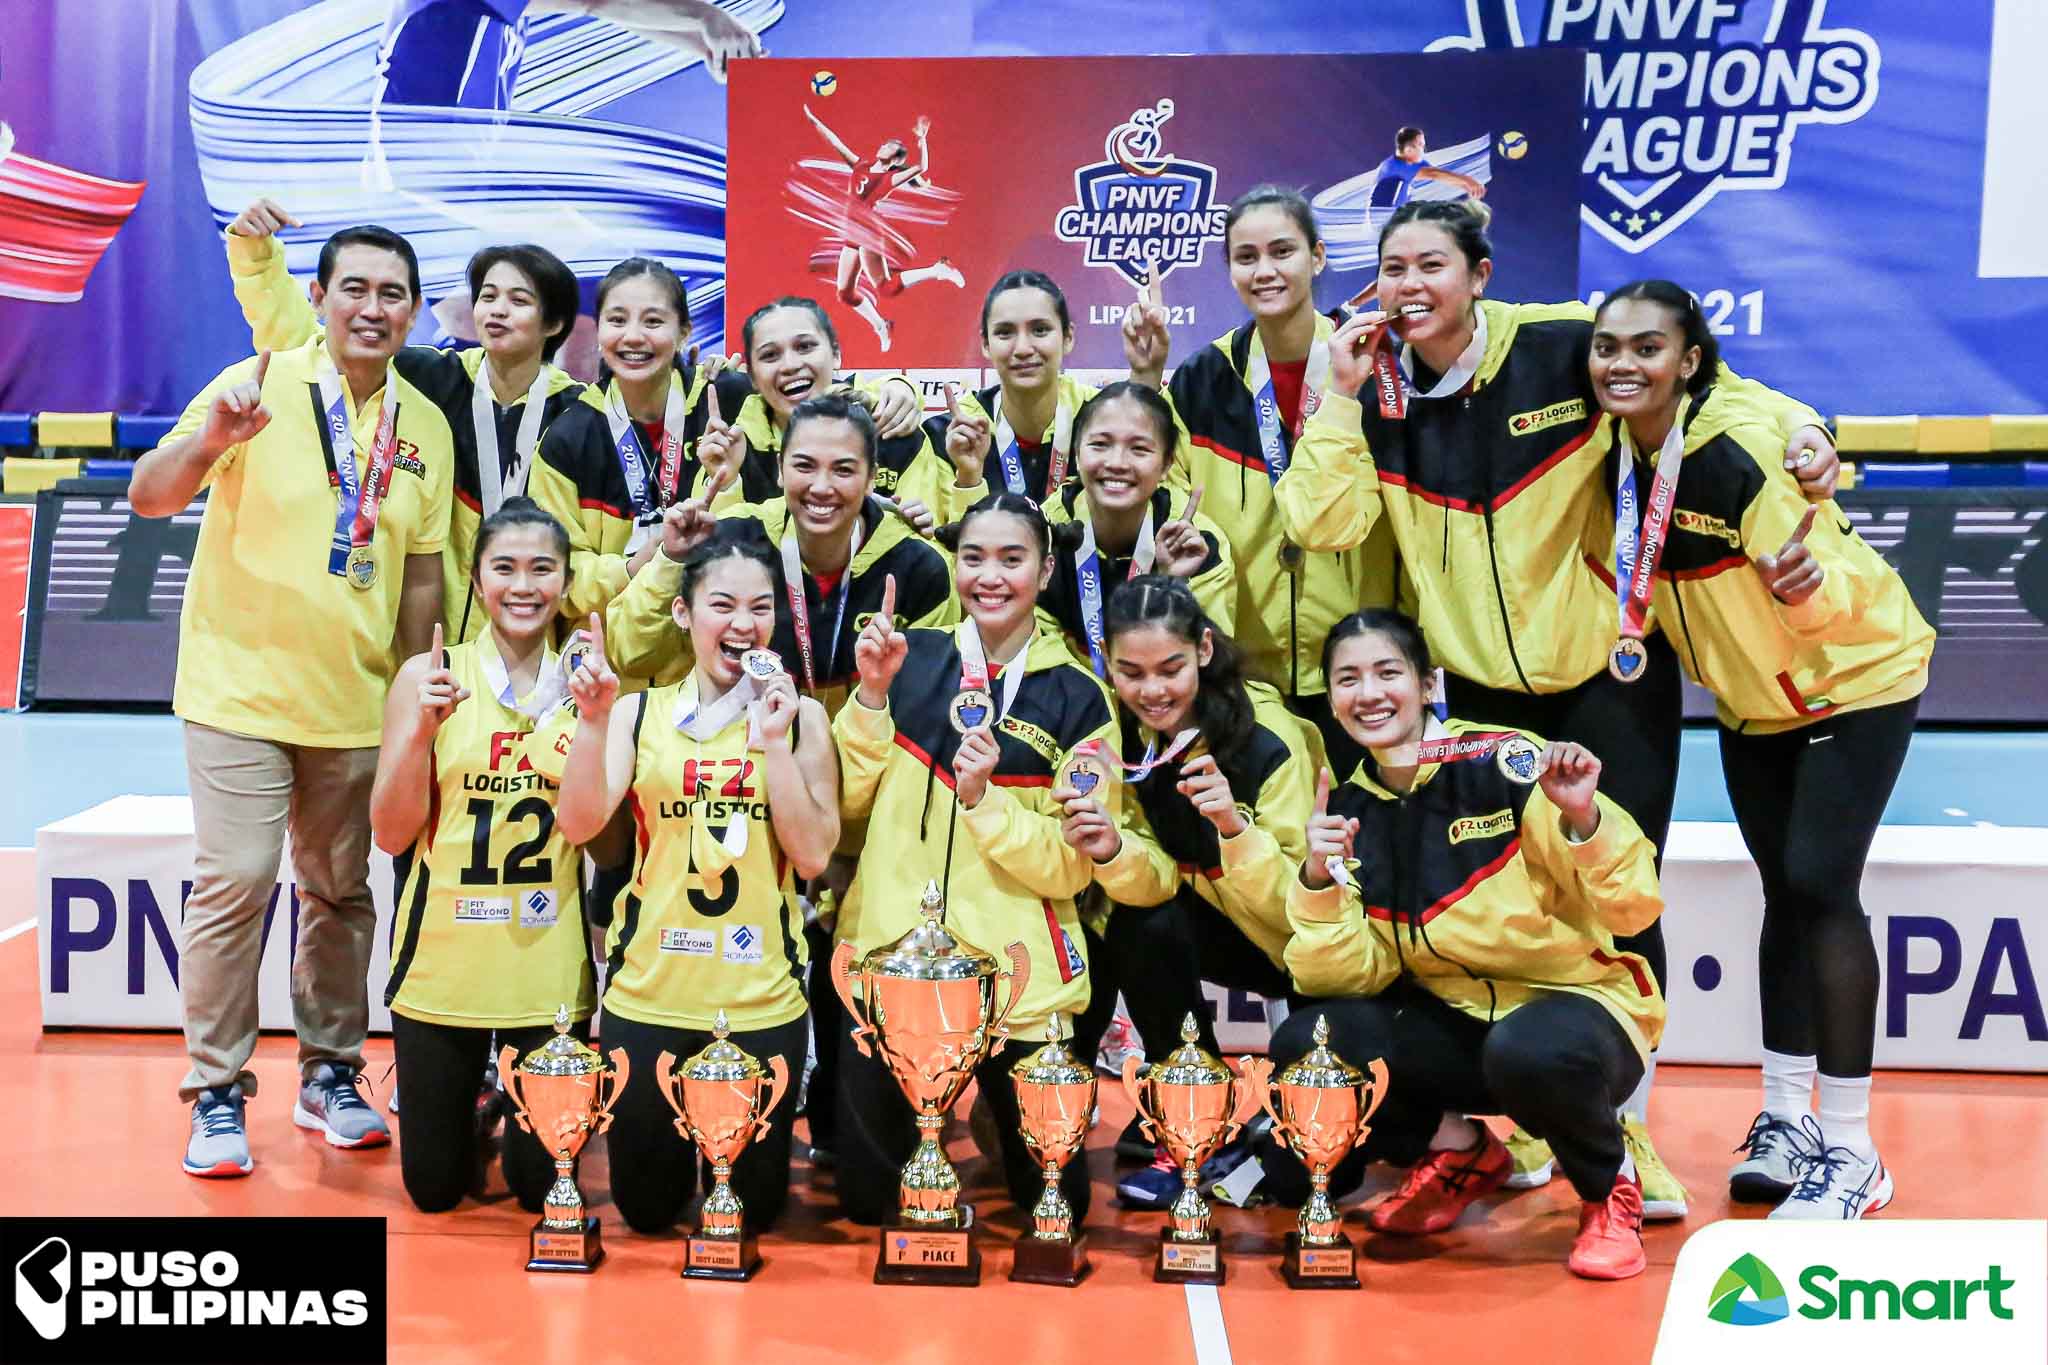 2021-PNVF-Champions-League-F2-Logistics Personal growth the main reason why Gervacio joined F2 Logistics News PVL Volleyball  - philippine sports news